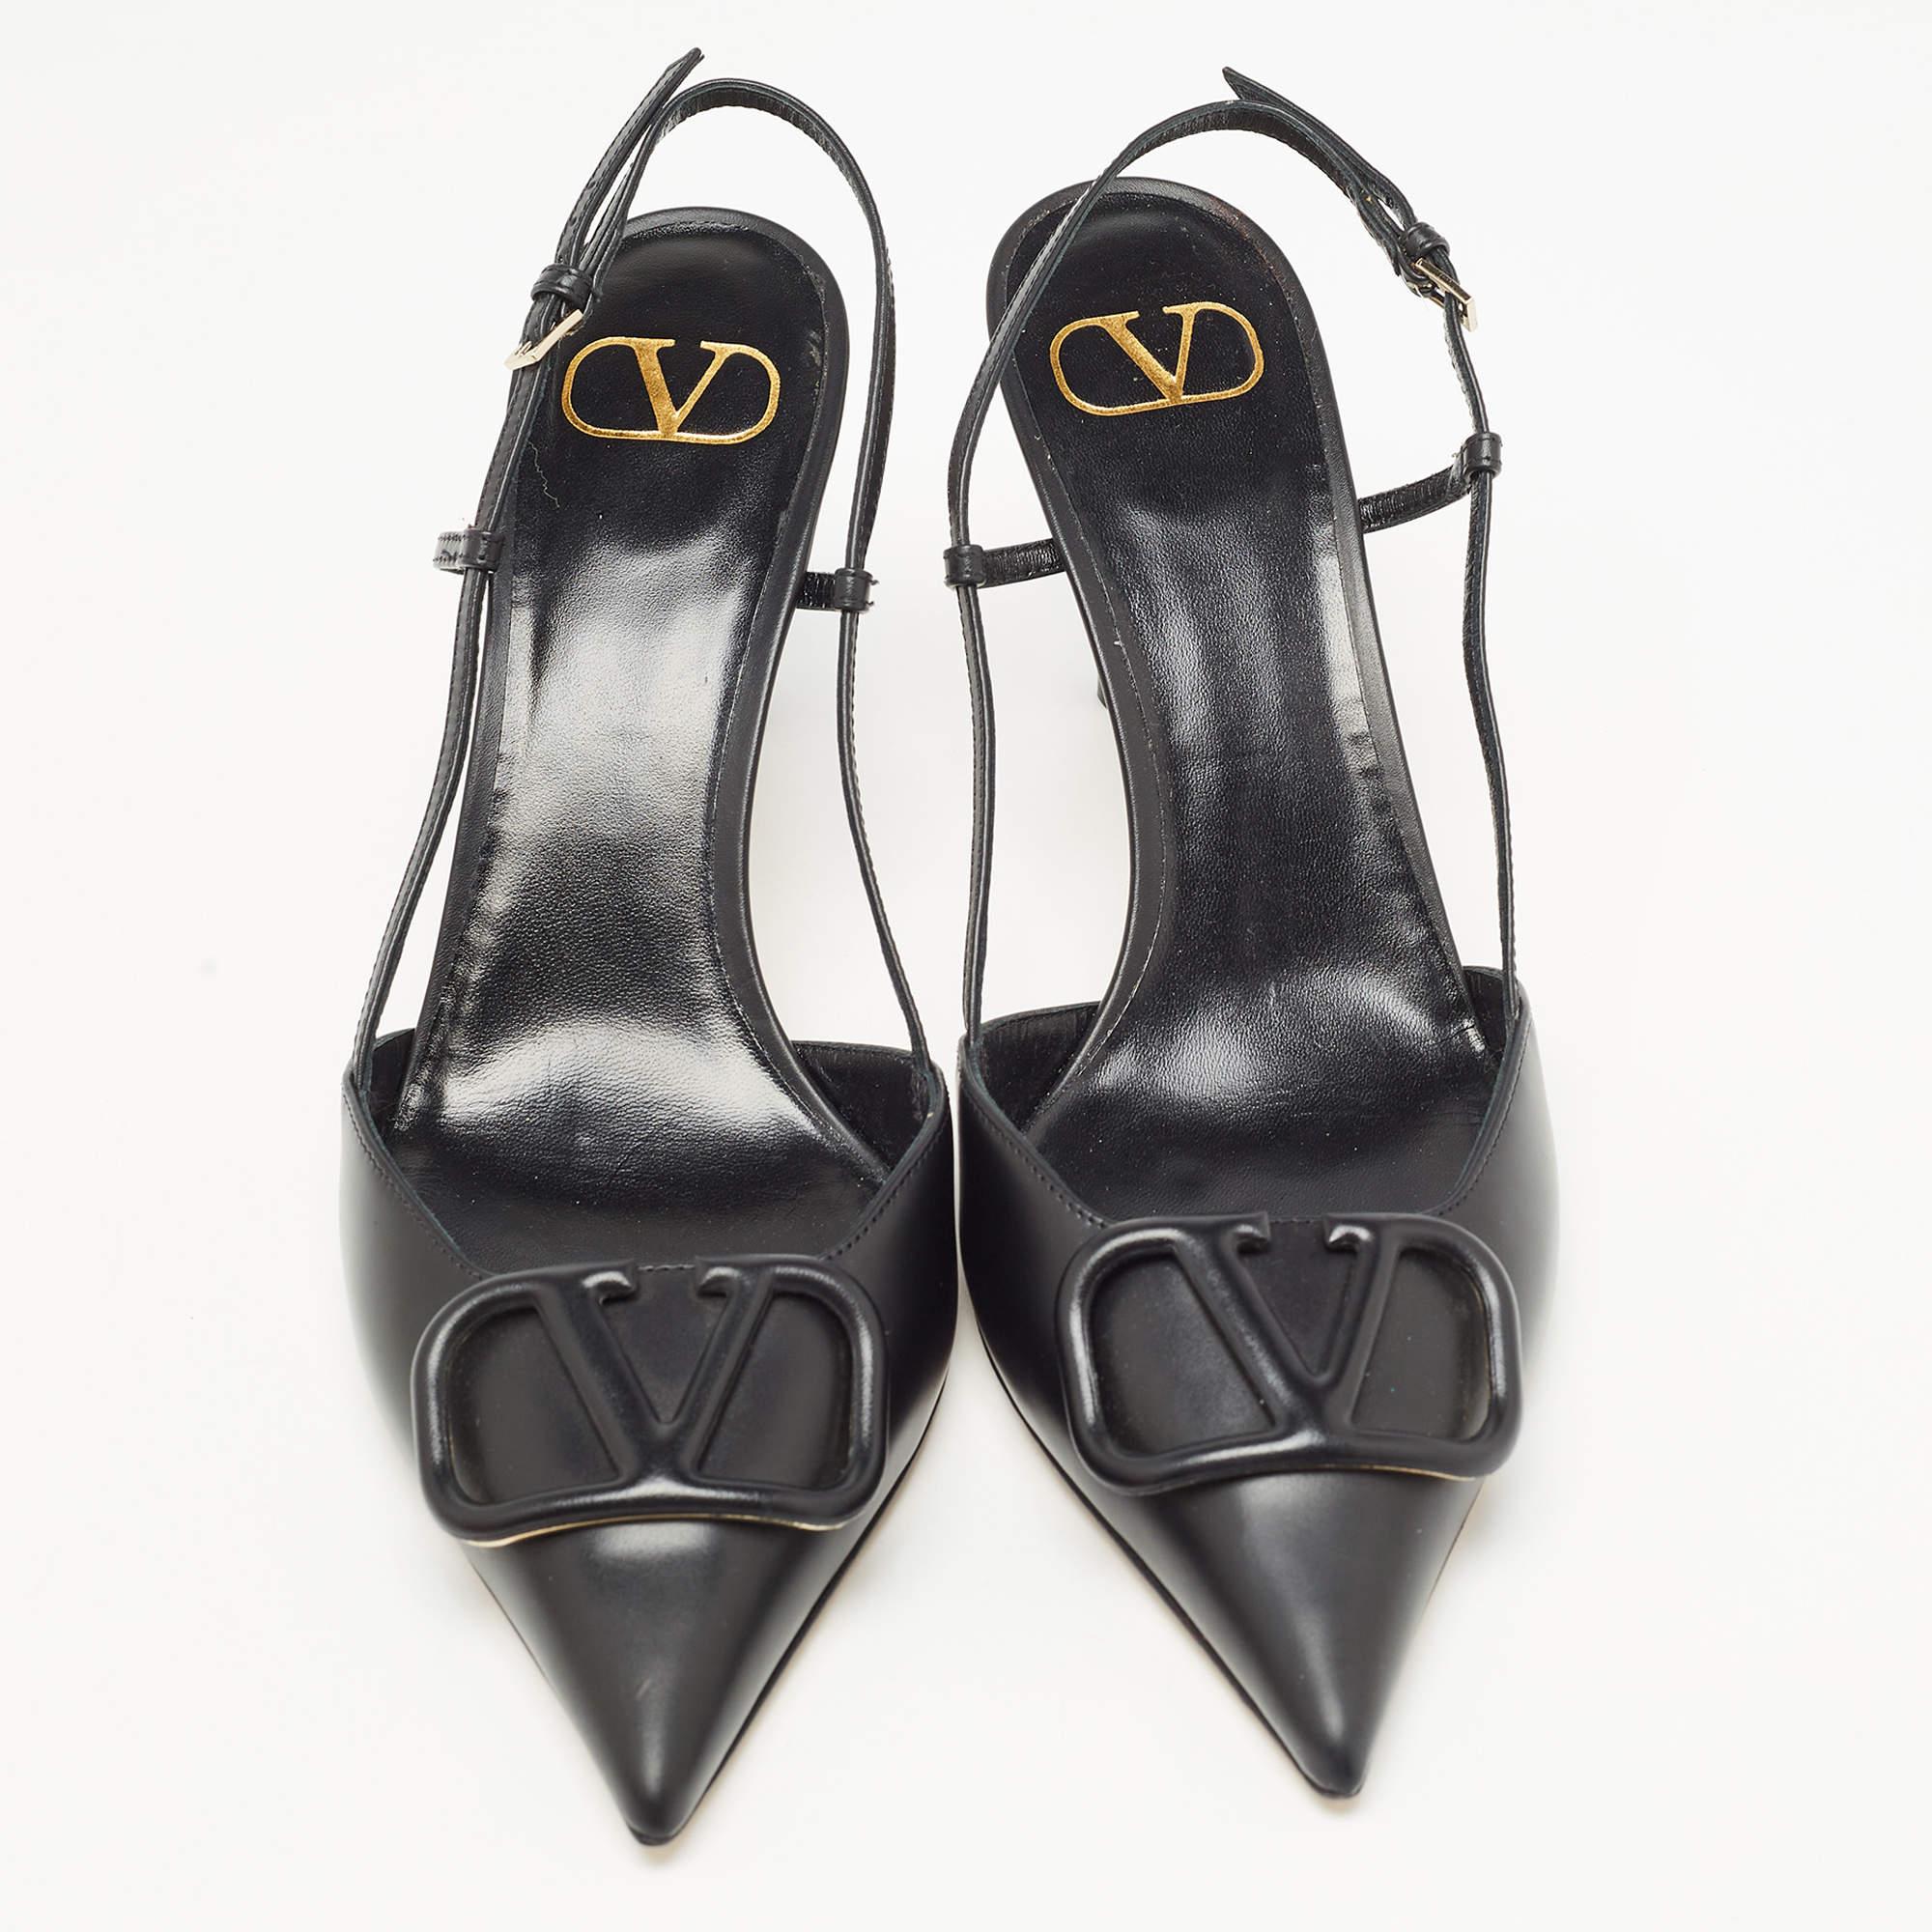 Valentino's pumps exude sophistication and modern elegance. Crafted from luxurious black leather, they feature a sleek pointed toe, a distinctive VLogo accent, and a comfortable slingback strap. These pumps seamlessly blend timeless style with